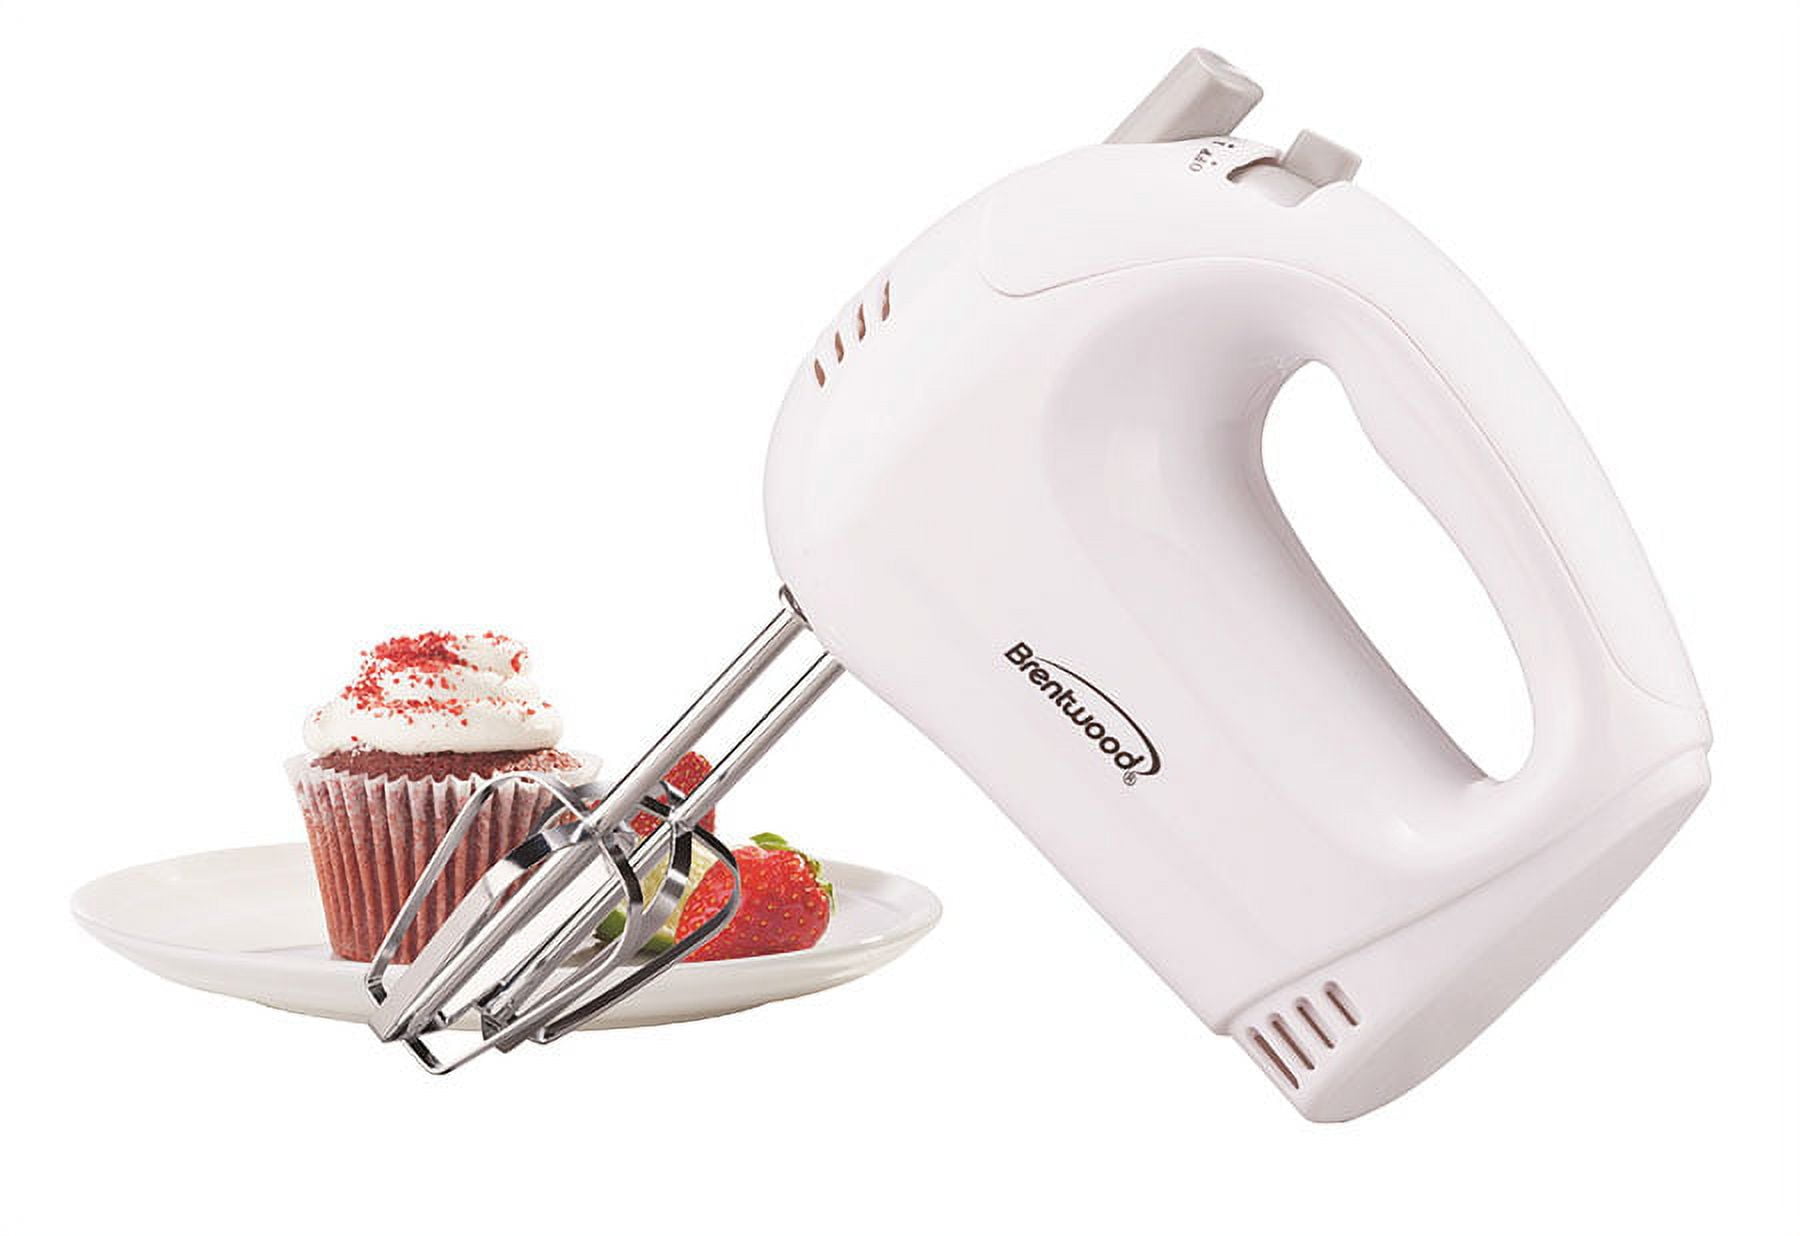 Brentwood HM-48W Lightweight 5-Speed Electric Hand Mixer, White - Brentwood  Appliances